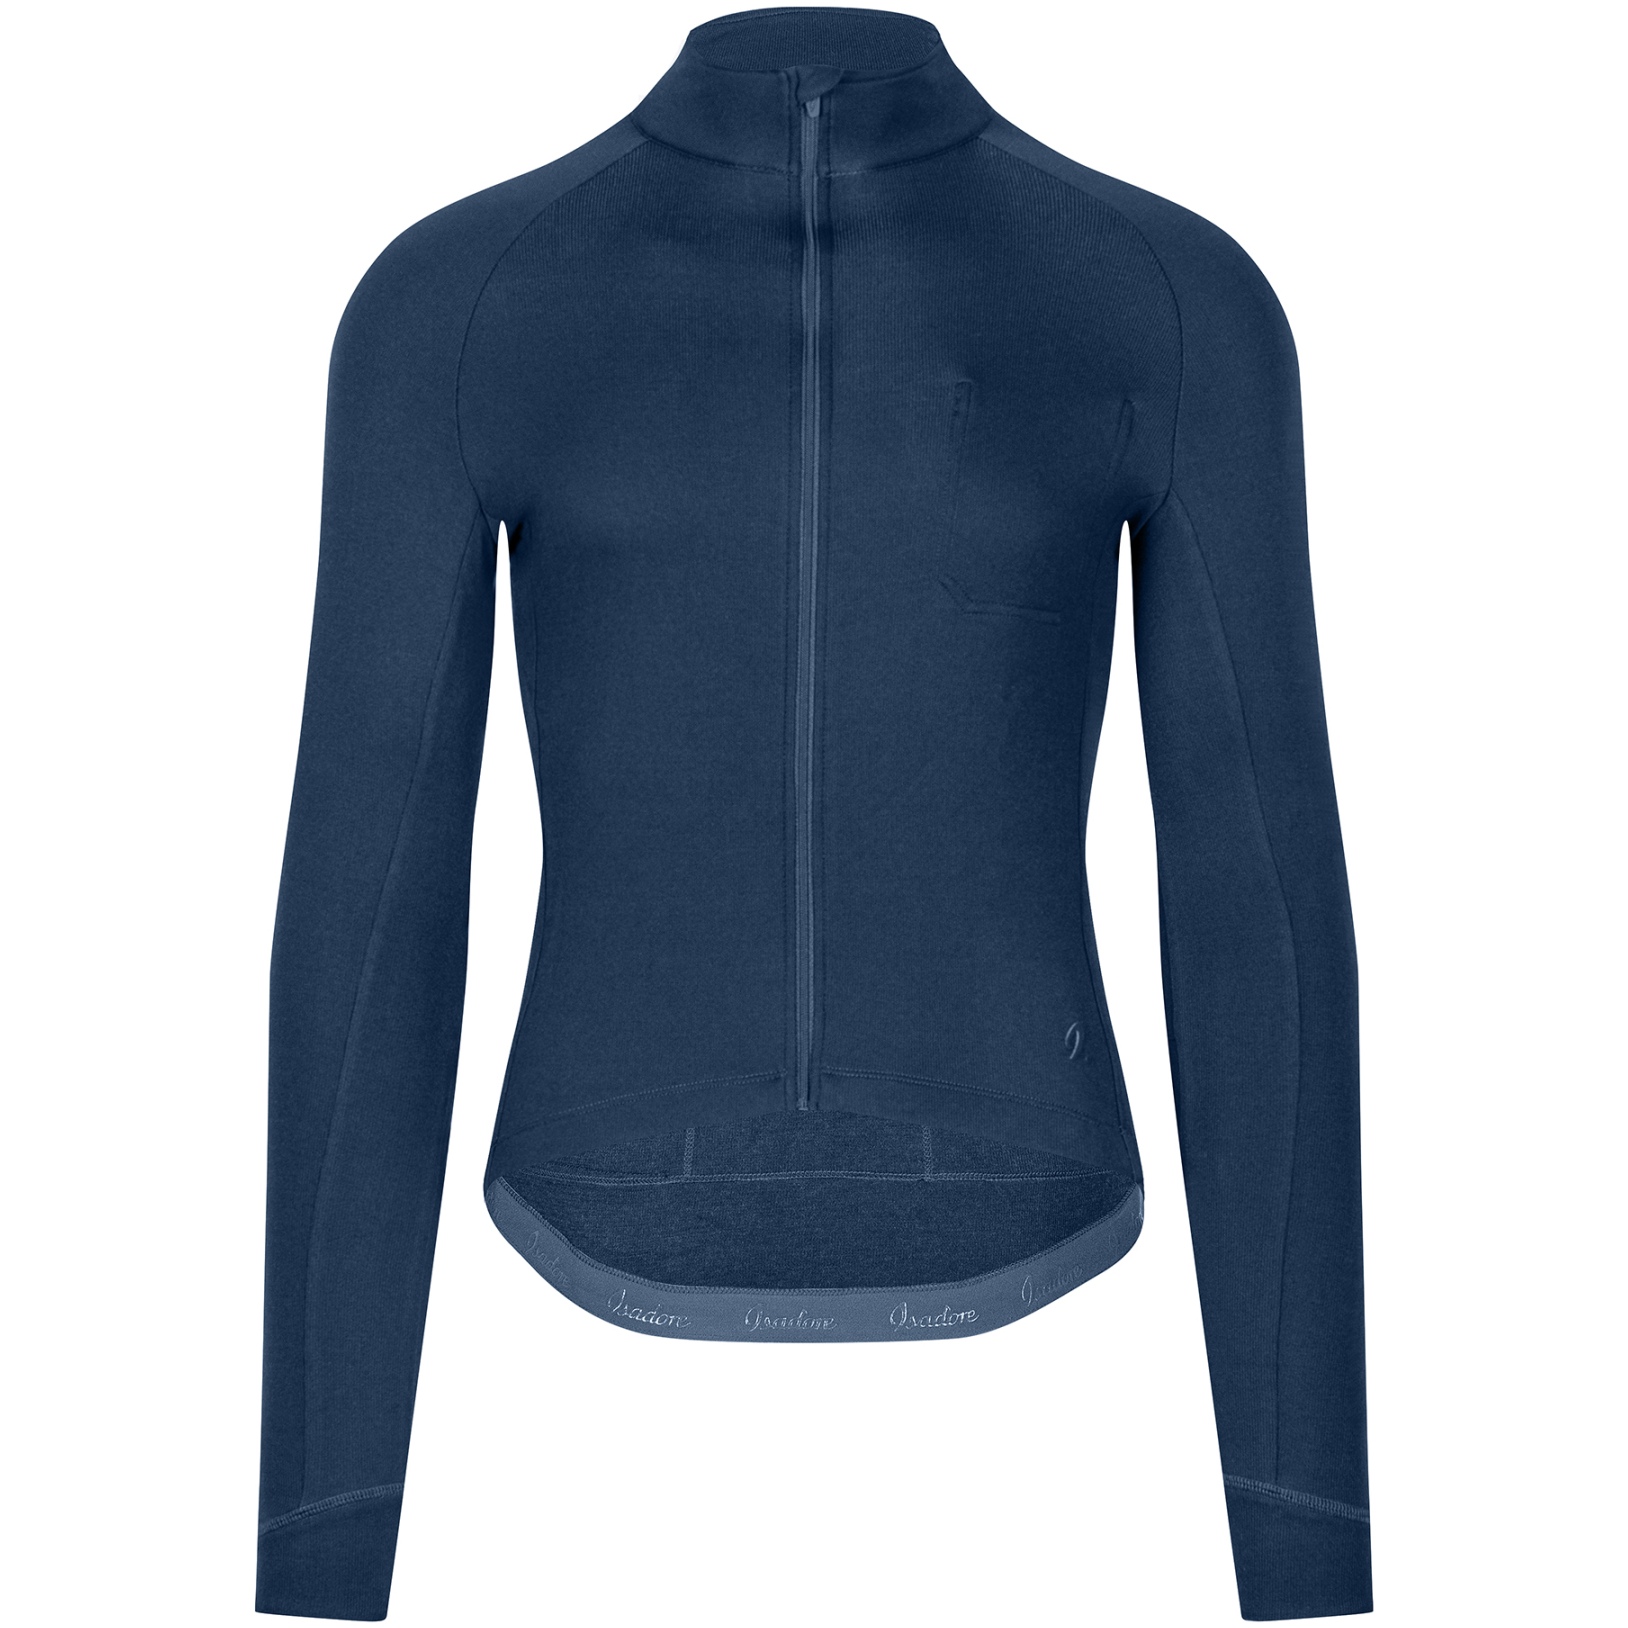 Picture of Isadore Signature Thermal Long Sleeve Jersey - Indigo Blue